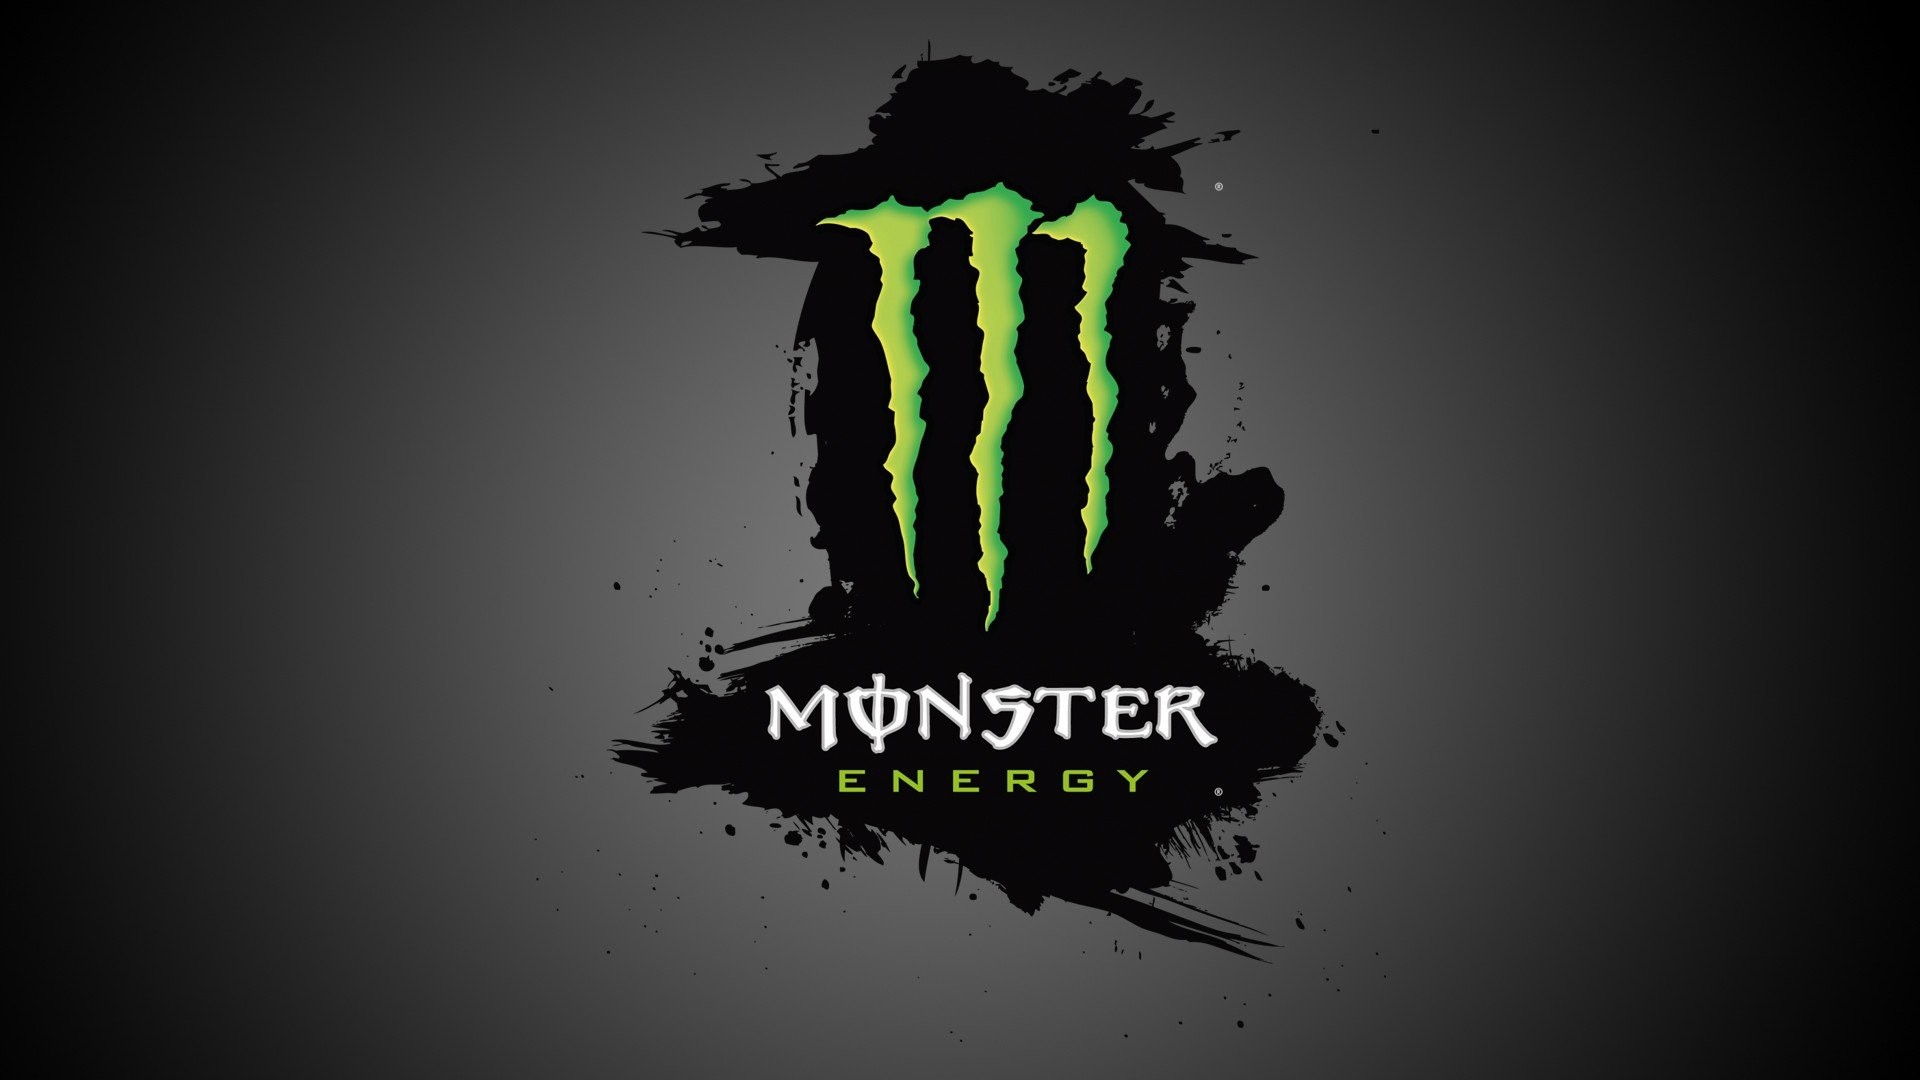 1920x1080 Amazing Monster Energy Eyes High Quality In HD Wallpaper | WALLSEV